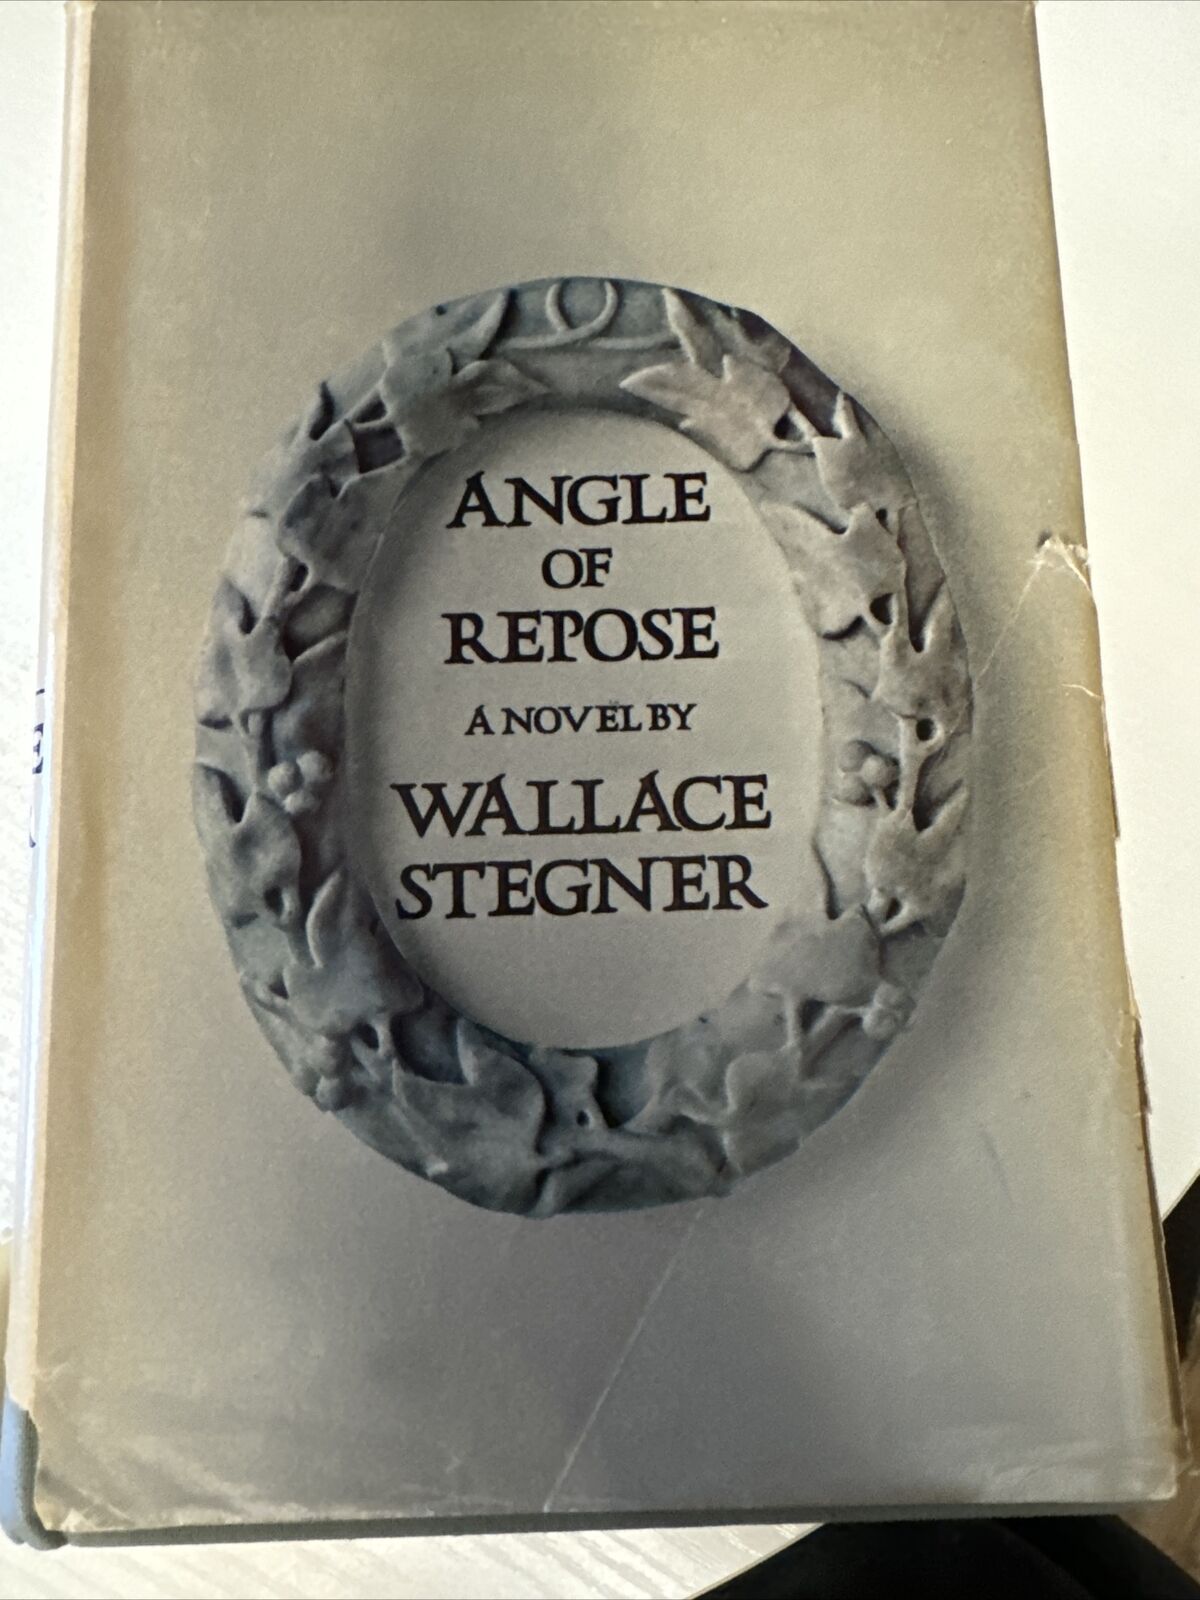 ANGLE OF REPOSE by WALLACE STEGNER 1st EDITION (STATED)with DJ, TOO.Minor Jacket